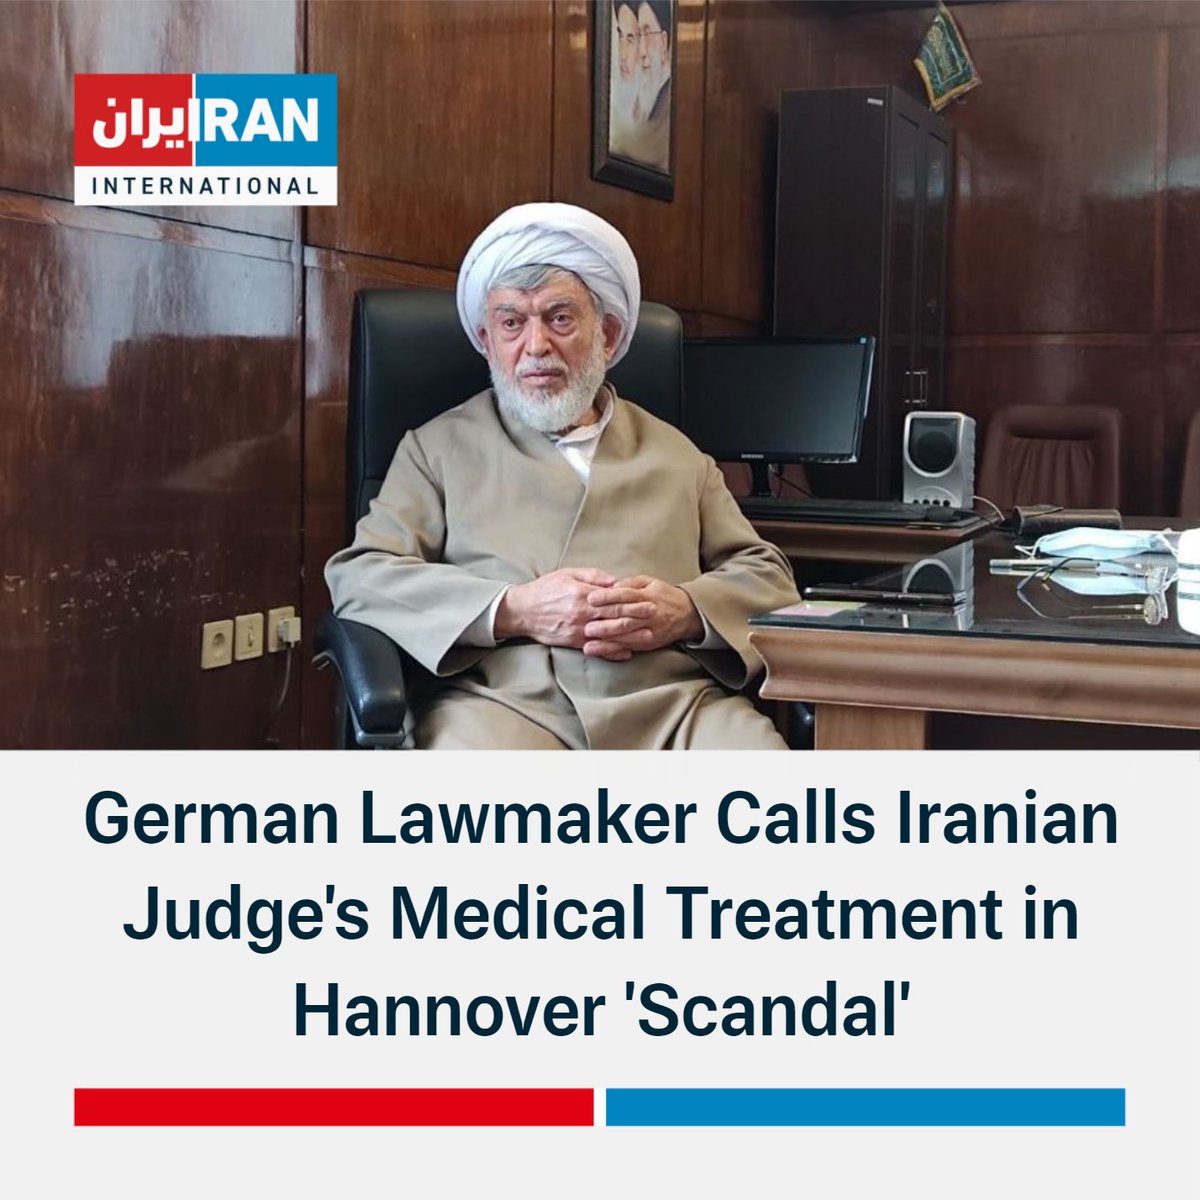 The fact that Hossein-Ali Nayyeri, the judge responsible for Iran's 1988 mass executions, has been treated in Hannover for several weeks without any problem while German national Jamshid Sharmahd faces death penalty in Iran is a 'scandal', German MP @RenataAlt_MdB told @IranIntl.